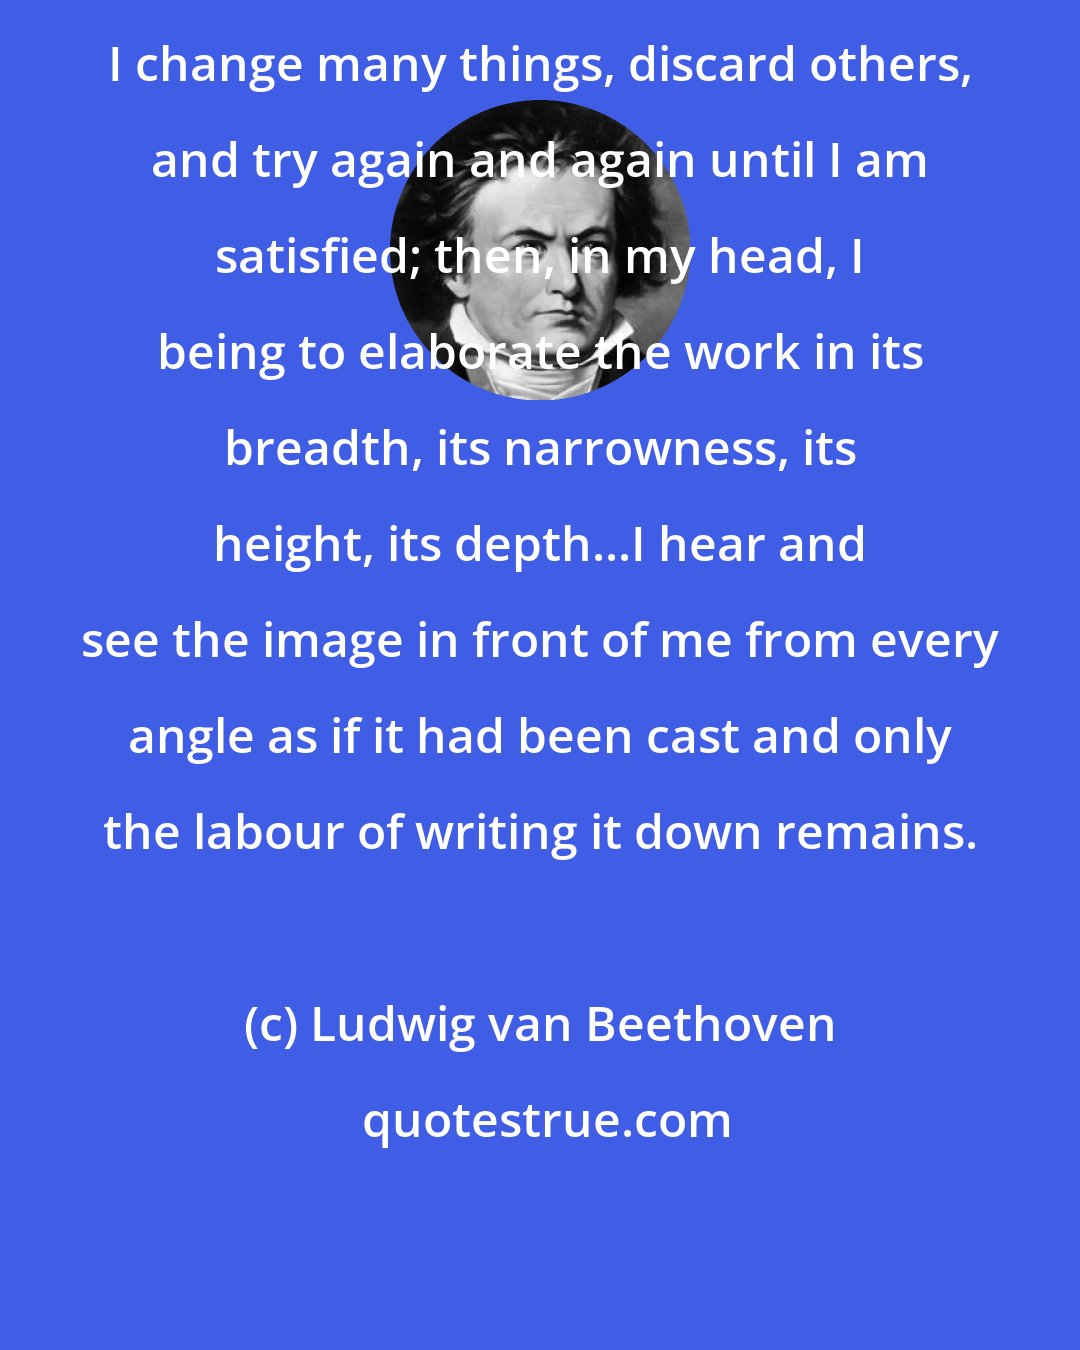 Ludwig van Beethoven: I change many things, discard others, and try again and again until I am satisfied; then, in my head, I being to elaborate the work in its breadth, its narrowness, its height, its depth...I hear and see the image in front of me from every angle as if it had been cast and only the labour of writing it down remains.